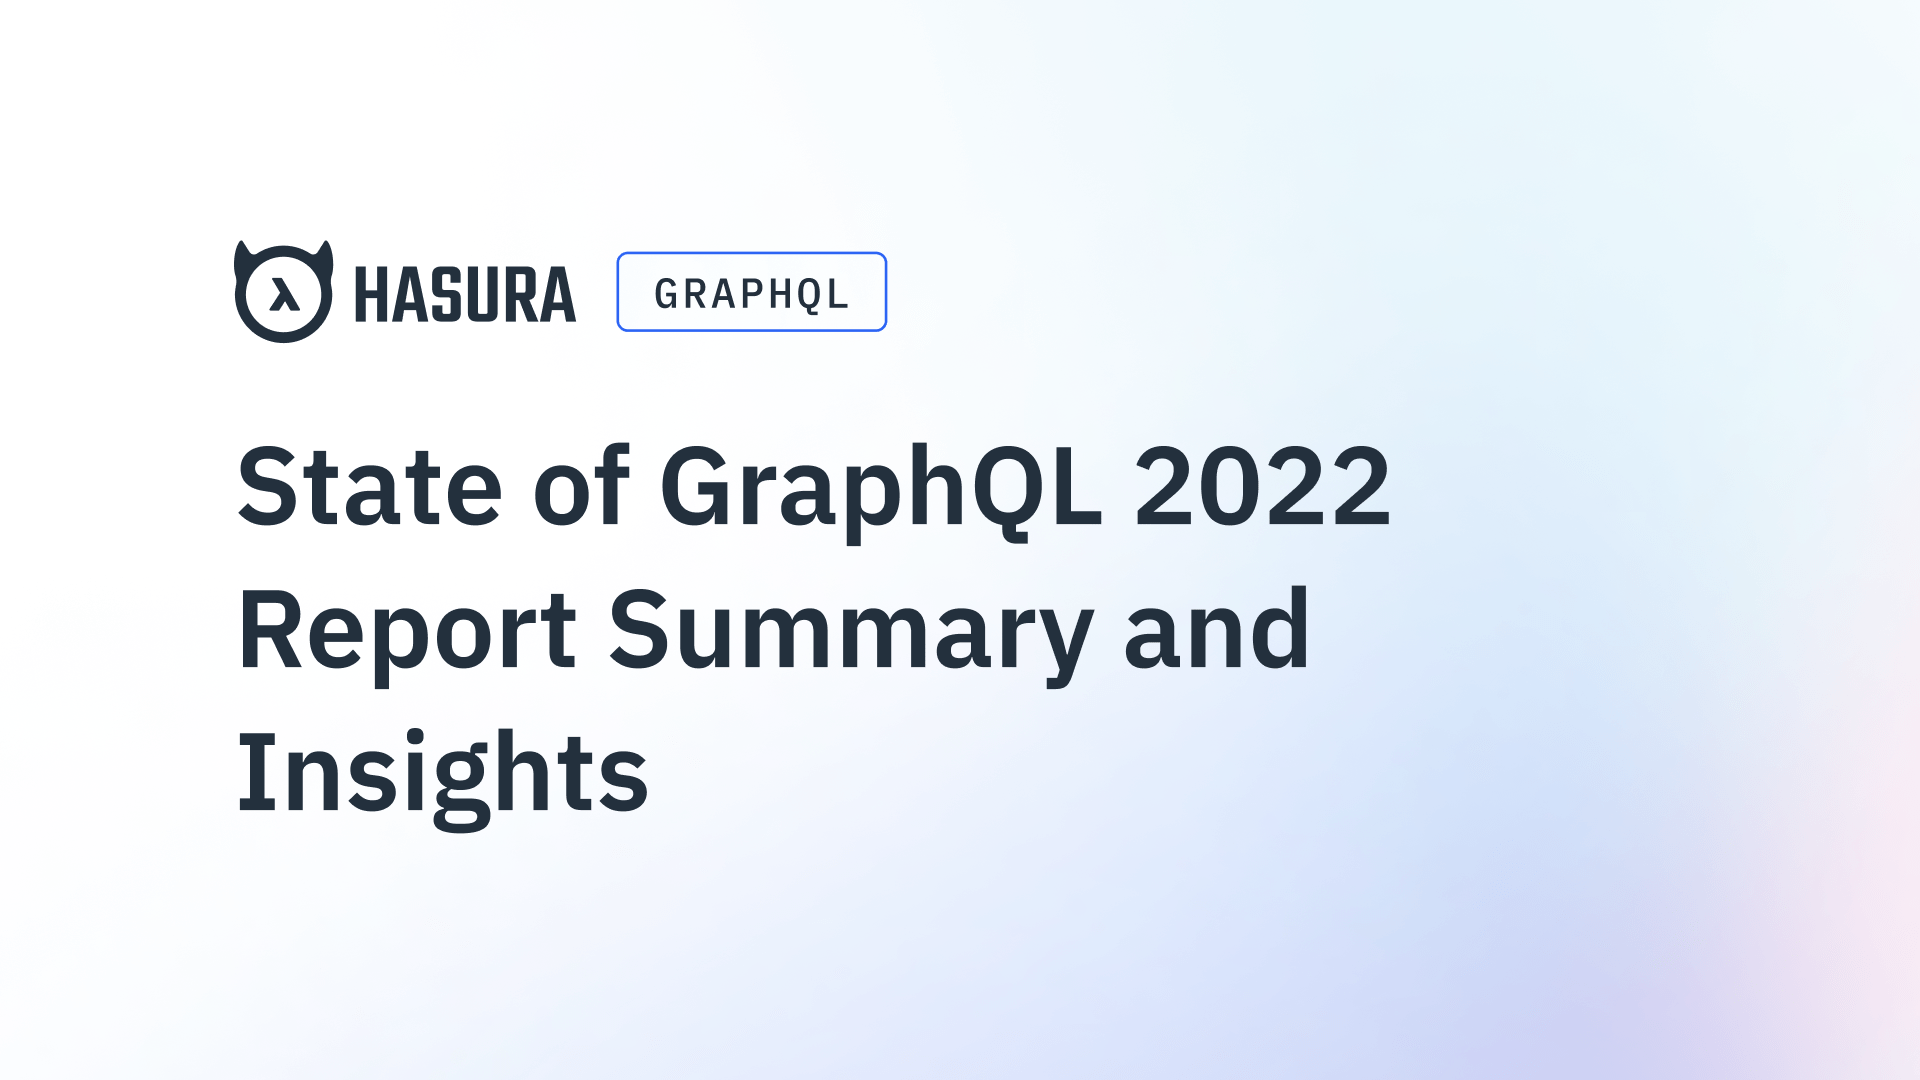 State of GraphQL 2022 Survey Report Summary and Insights